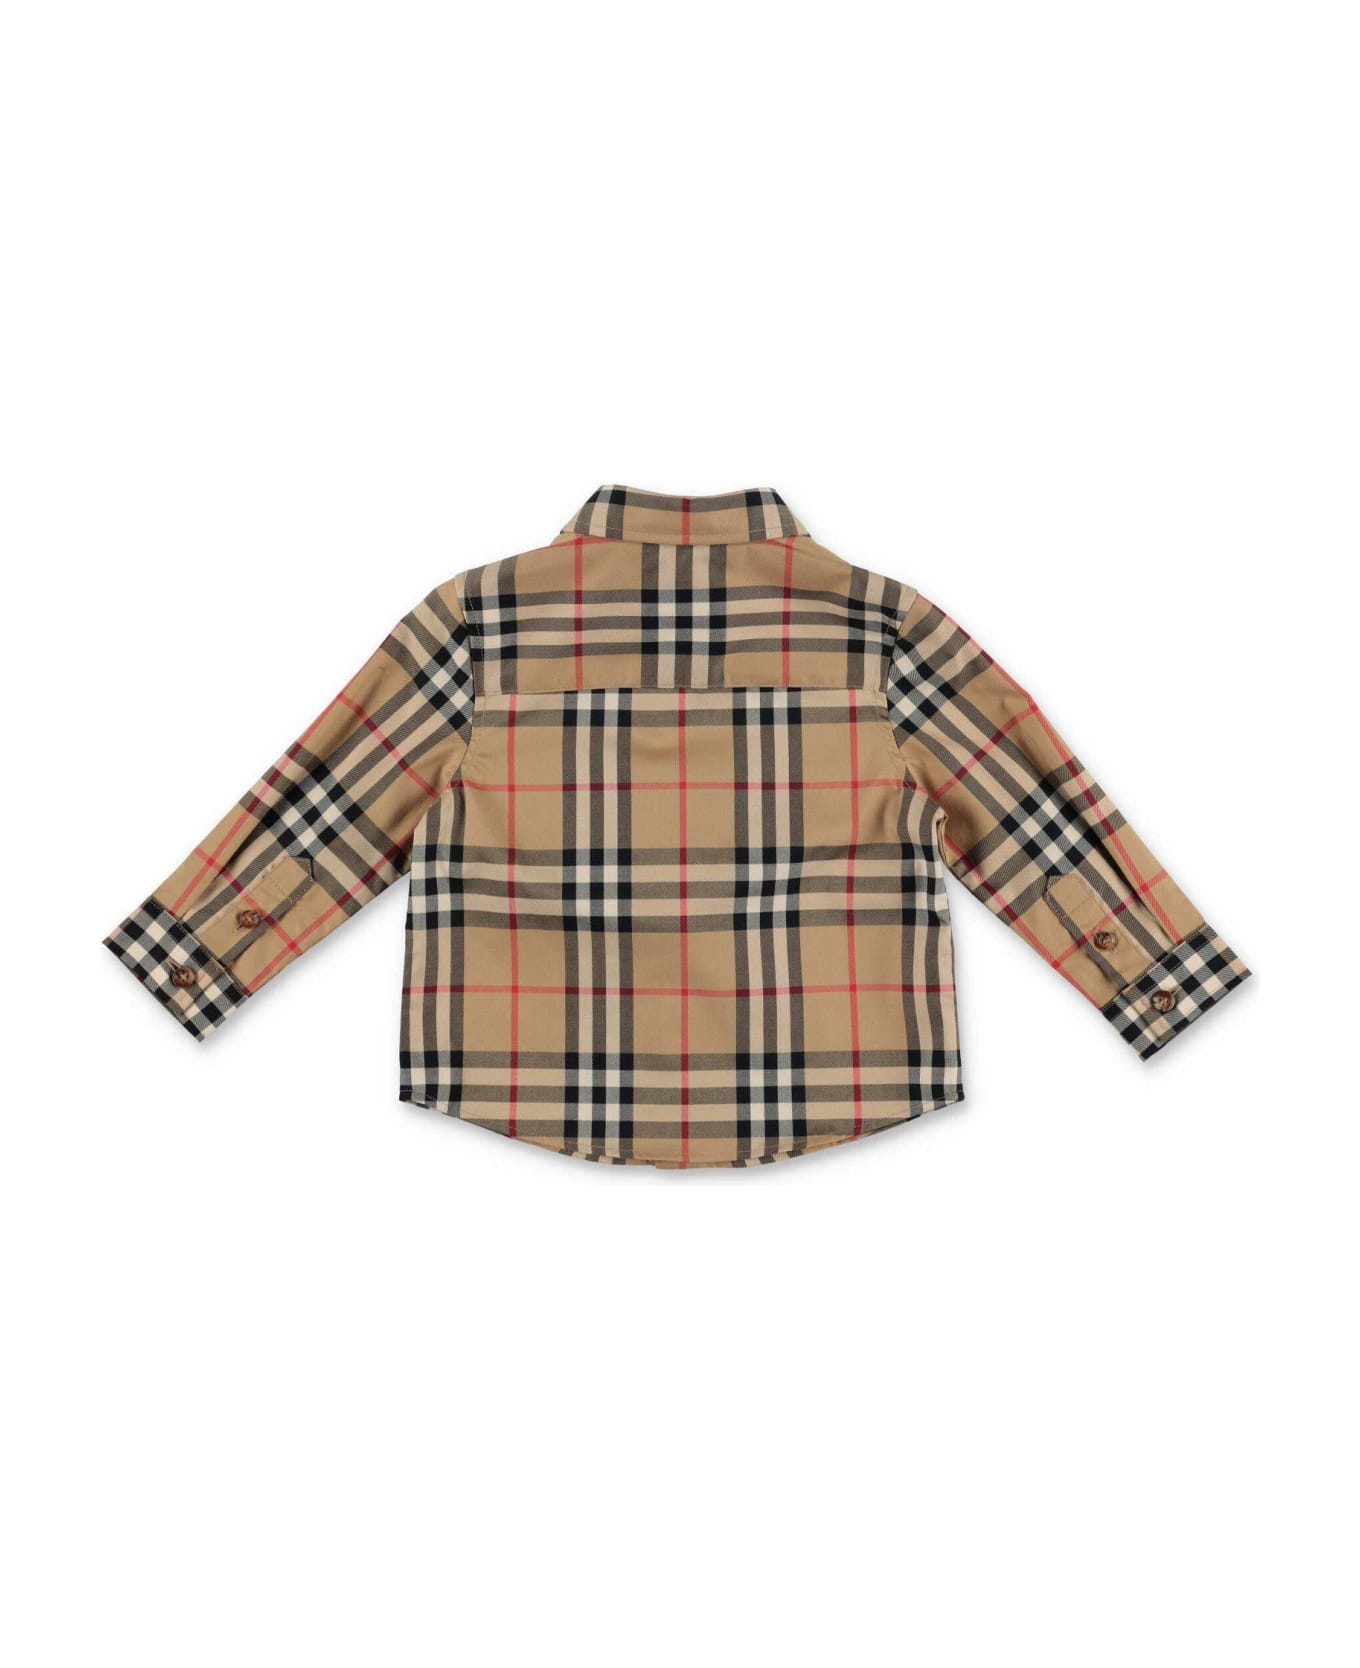 Burberry Checked Long-sleeved Shirt - Archive beige ip chk シャツ